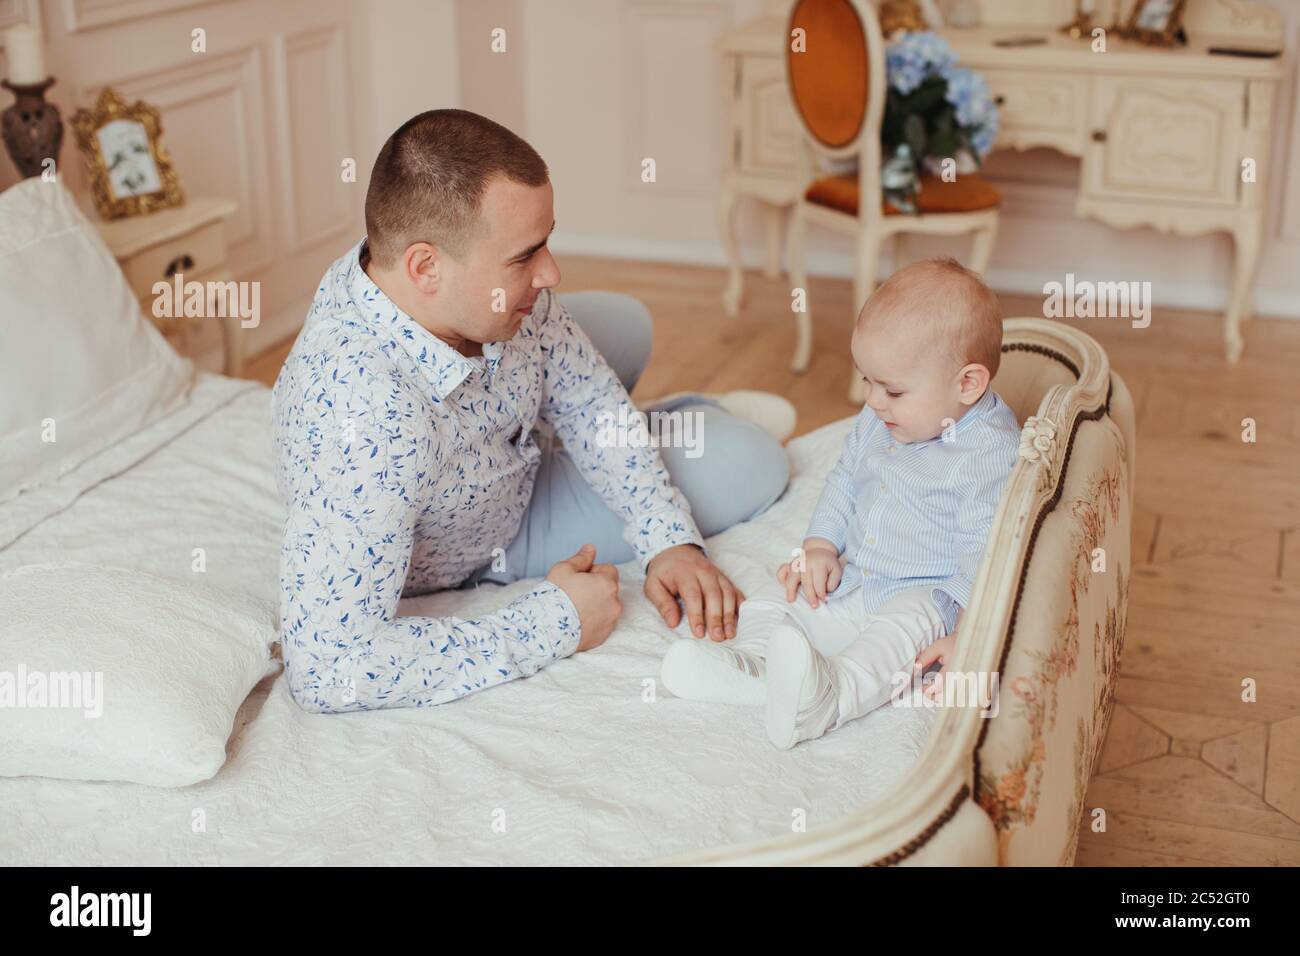 Father sitting on a bed with his baby son Stock Photo